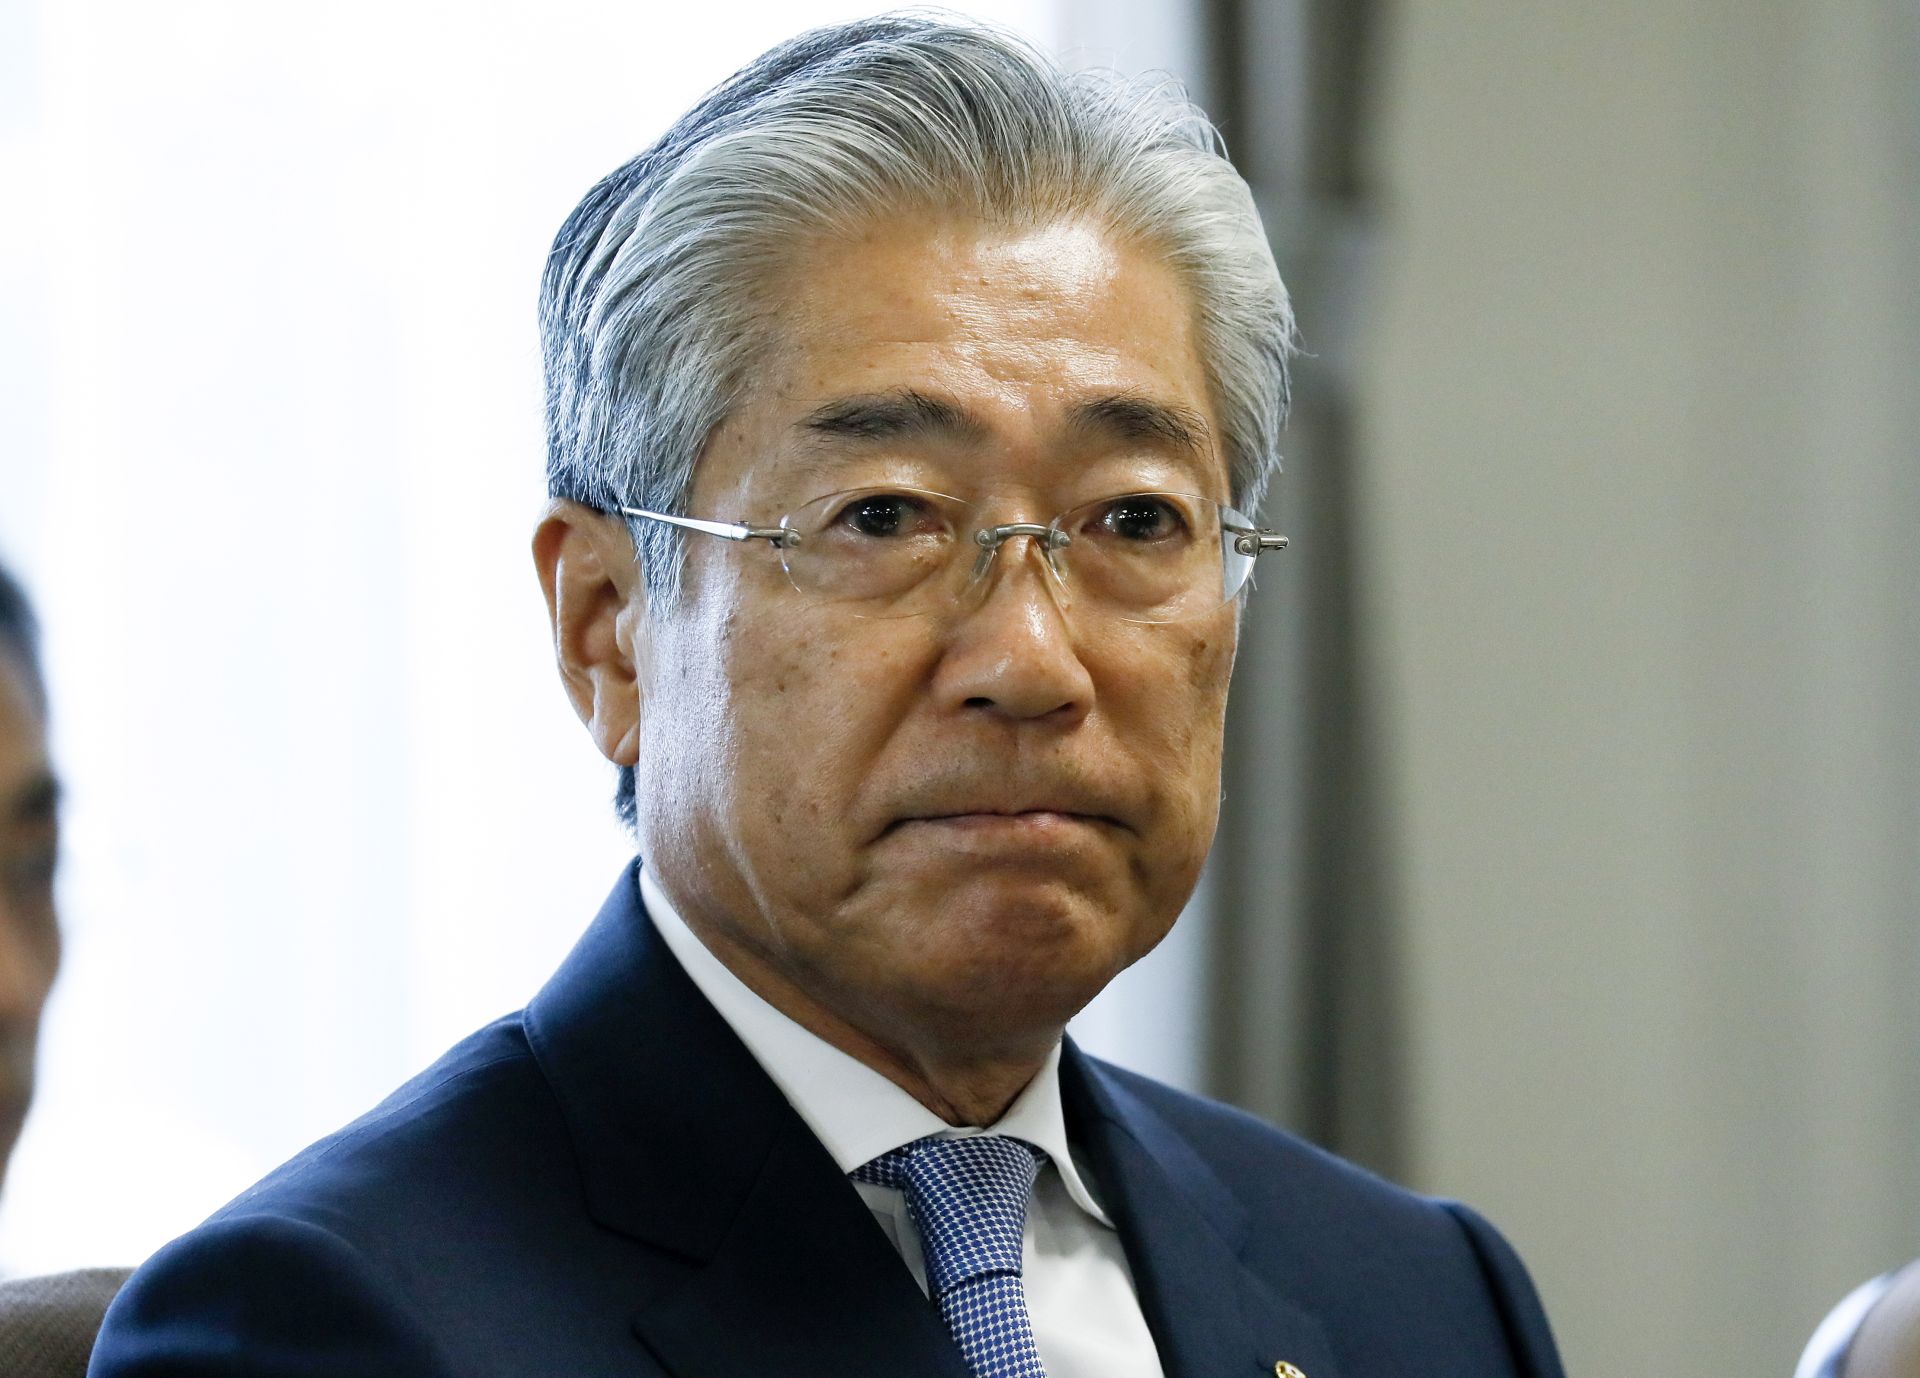 epa07447646 Tsunekazu Takeda (L), President of  Japanese Olympic Committee (JOC), is seen at the start of a JOC board meeting in Tokyo, Japan, 19 March 2019. Takeda is facing an investigation by French authorities' for suspected corruption relating to winning the bid for the 2020 Tokyo Olympics.  EPA/KIMIMASA MAYAMA